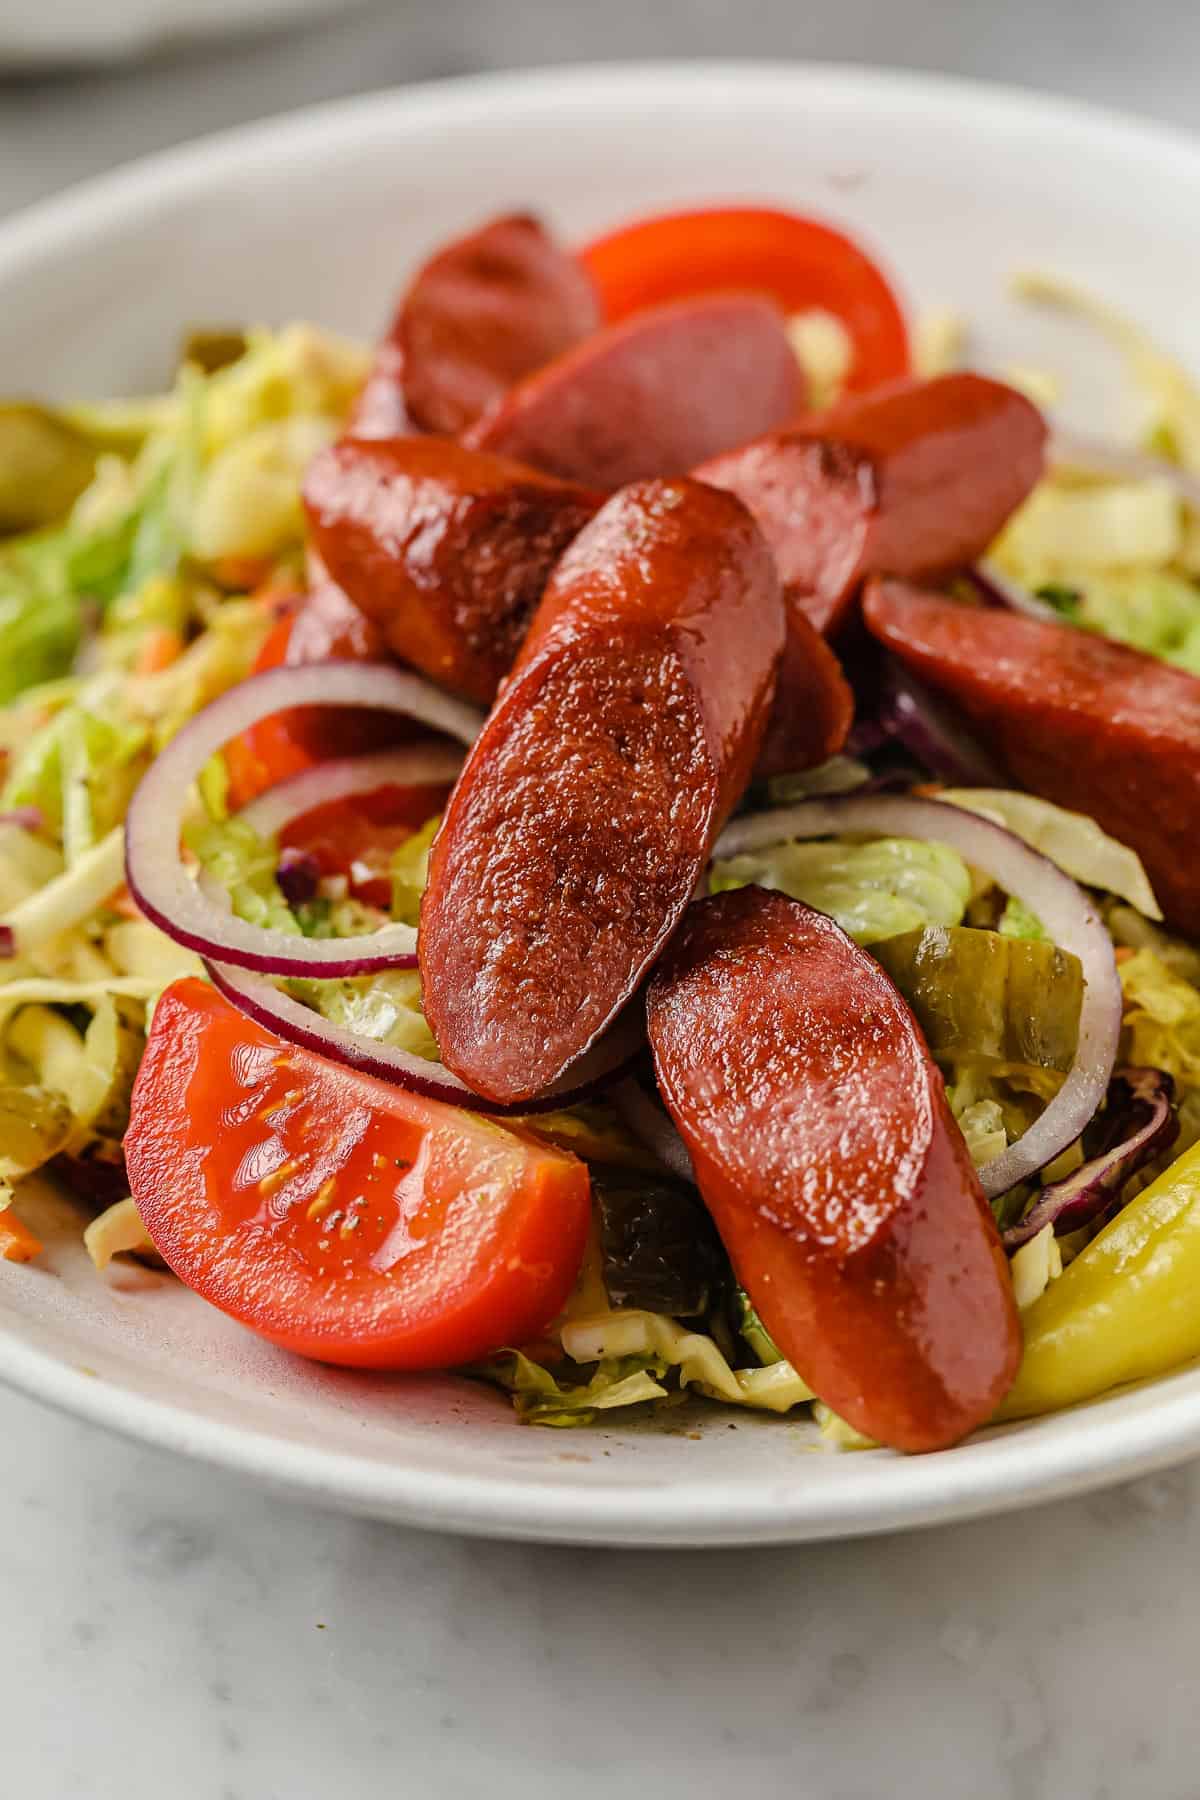 a salad piled high with grilled hot dogs, pickles, red onion, peppers, tomatoes, and a mustard dressing